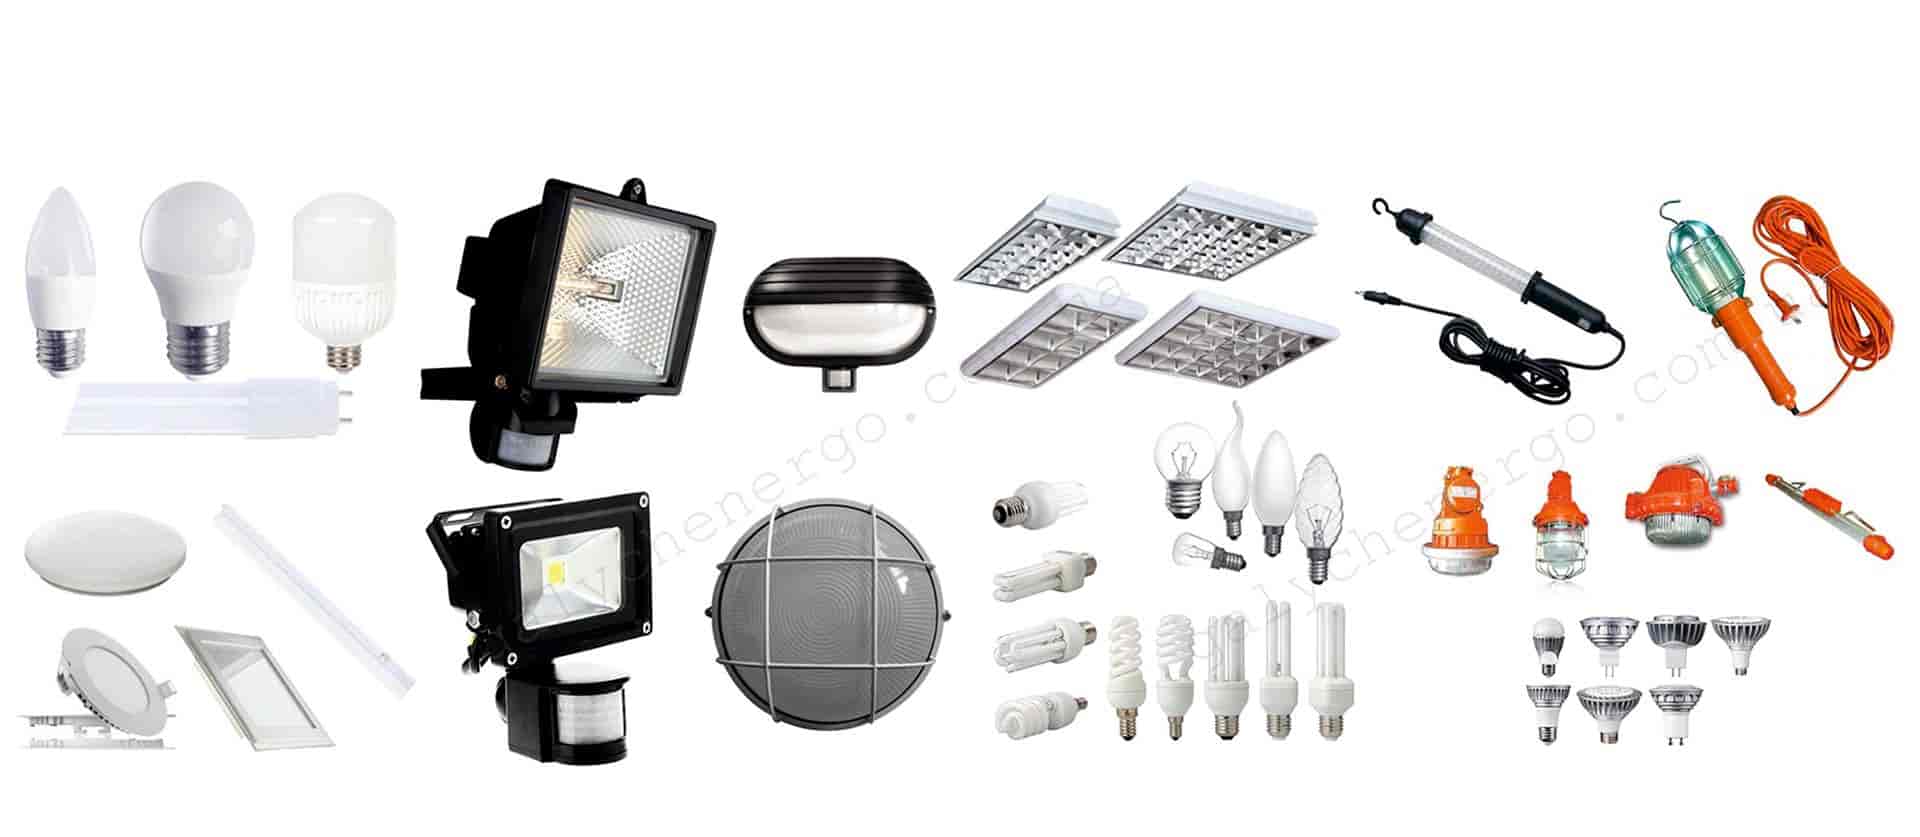 Lighting products